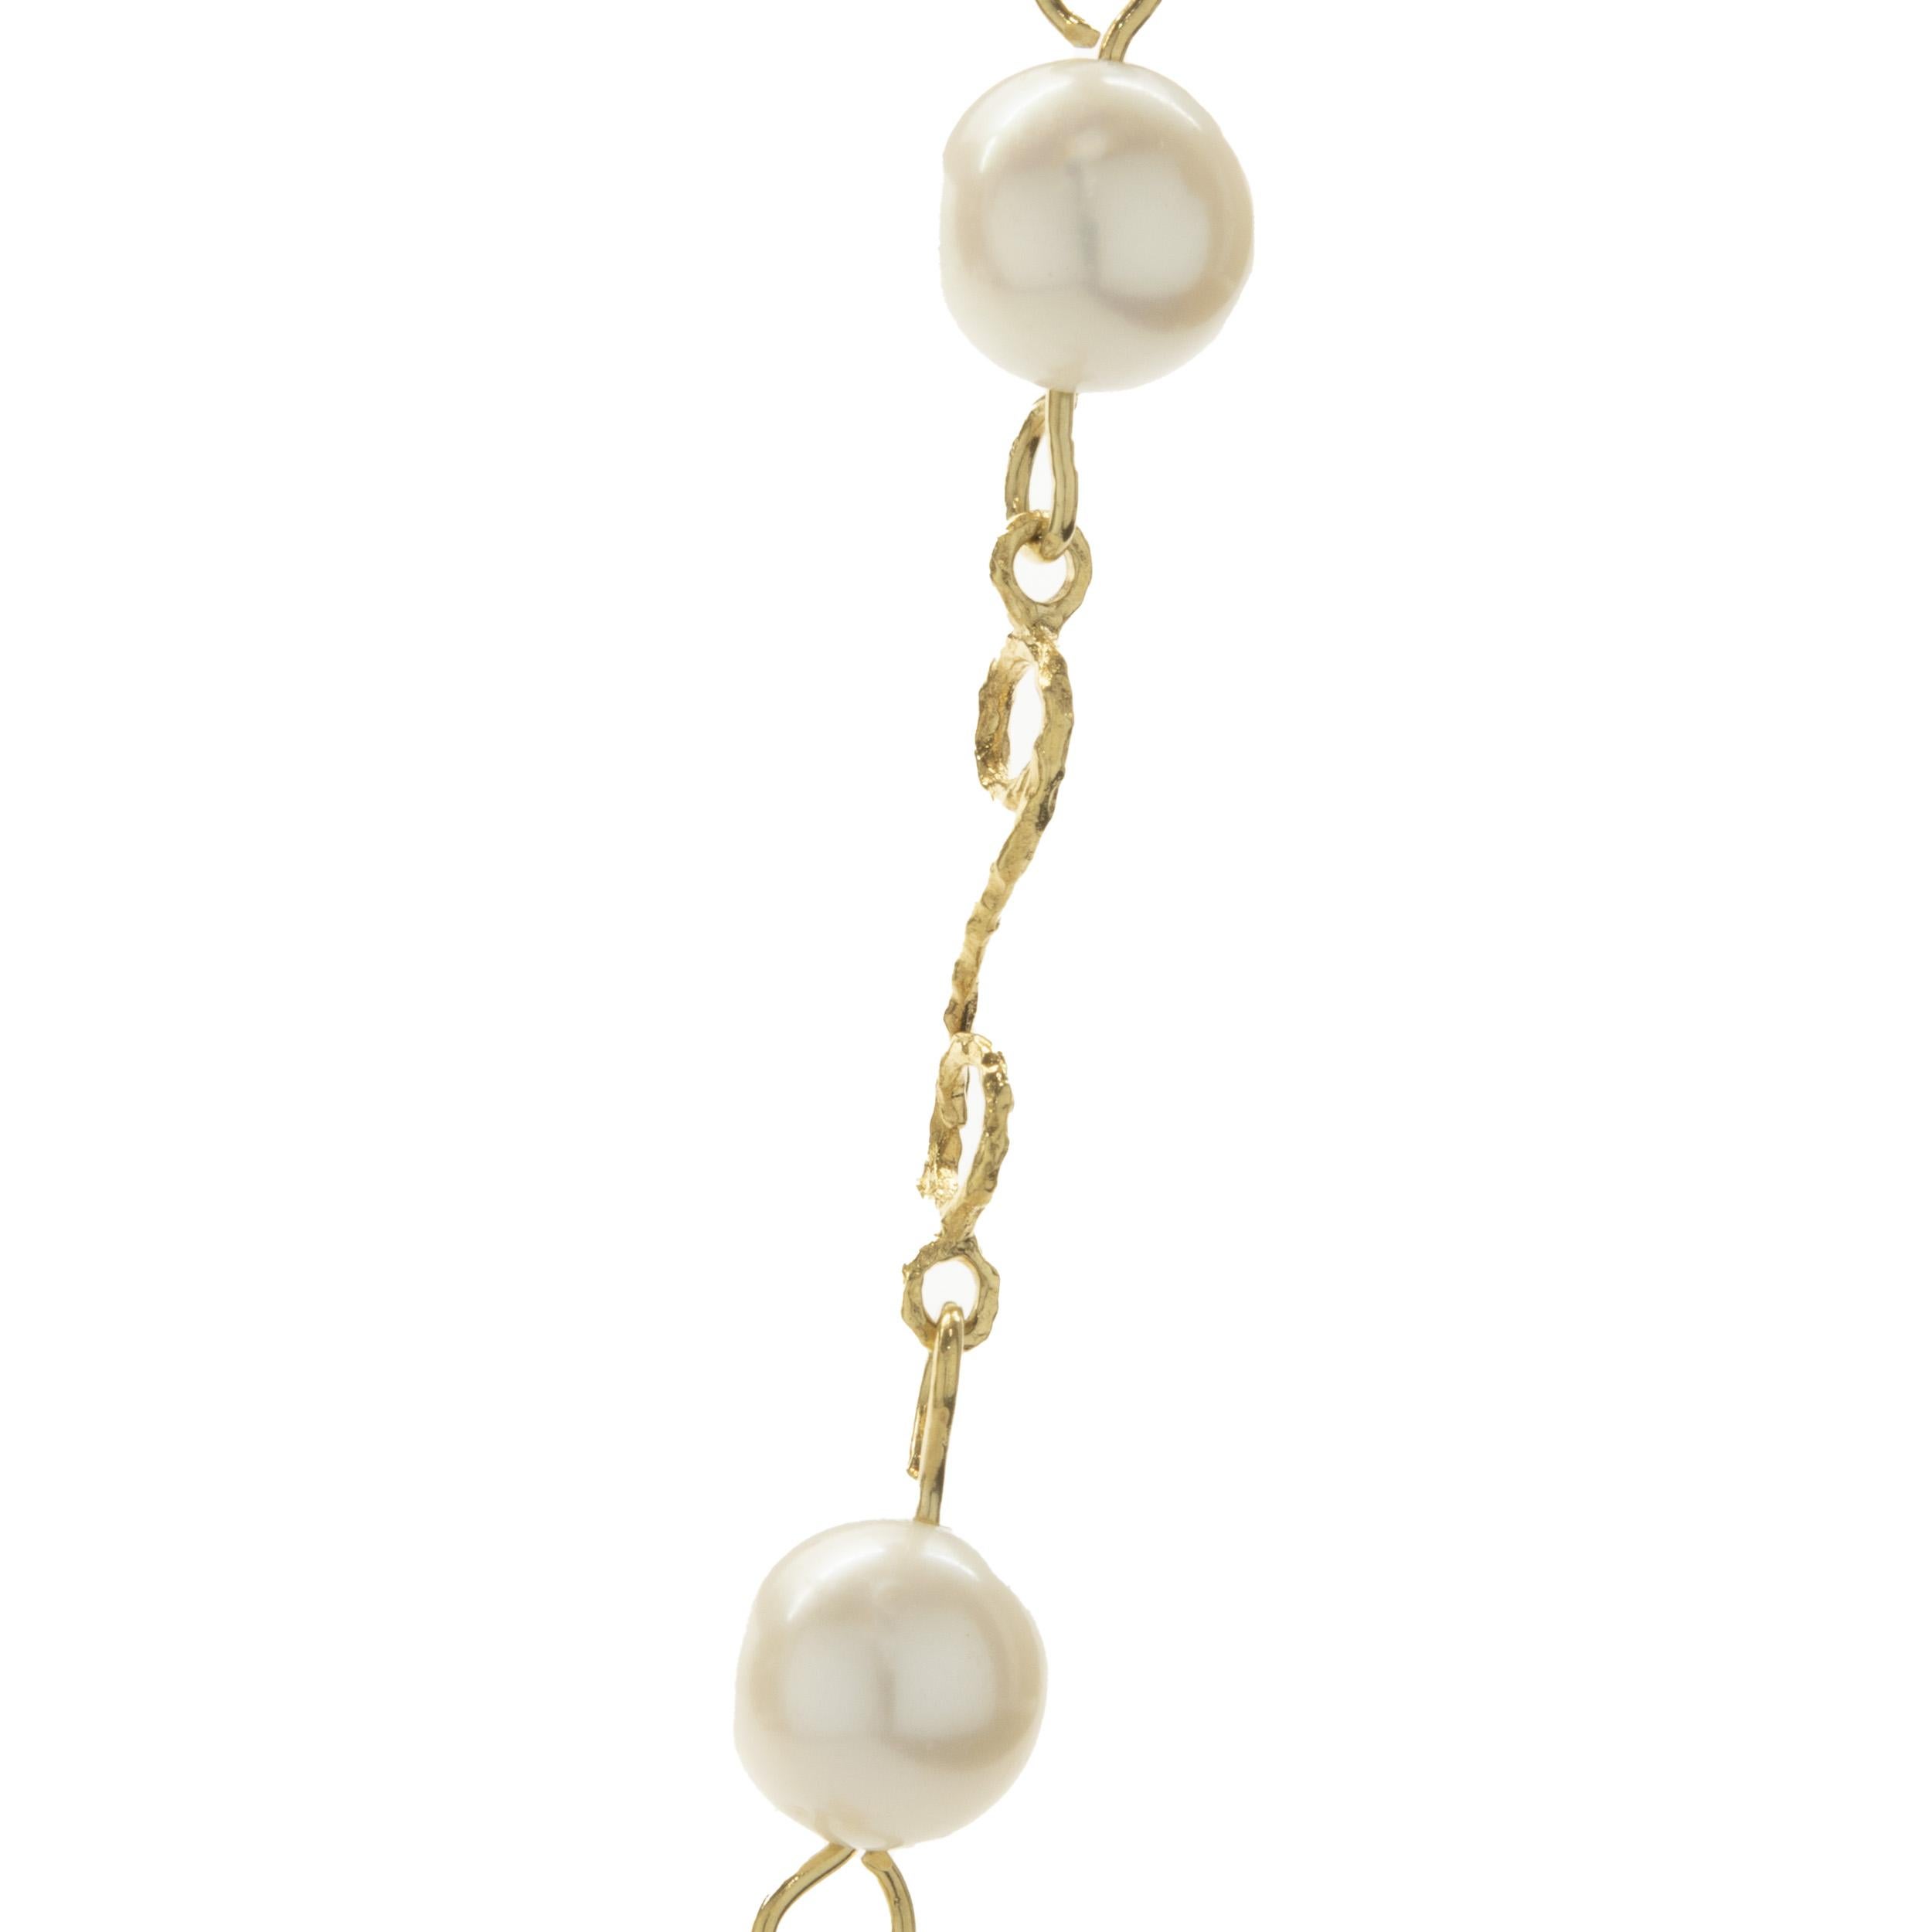 Designer: custom
Material: 9mm pearl / 18K yellow gold
Weight: 43.65 grams
Dimensions: necklace measures 32-inches